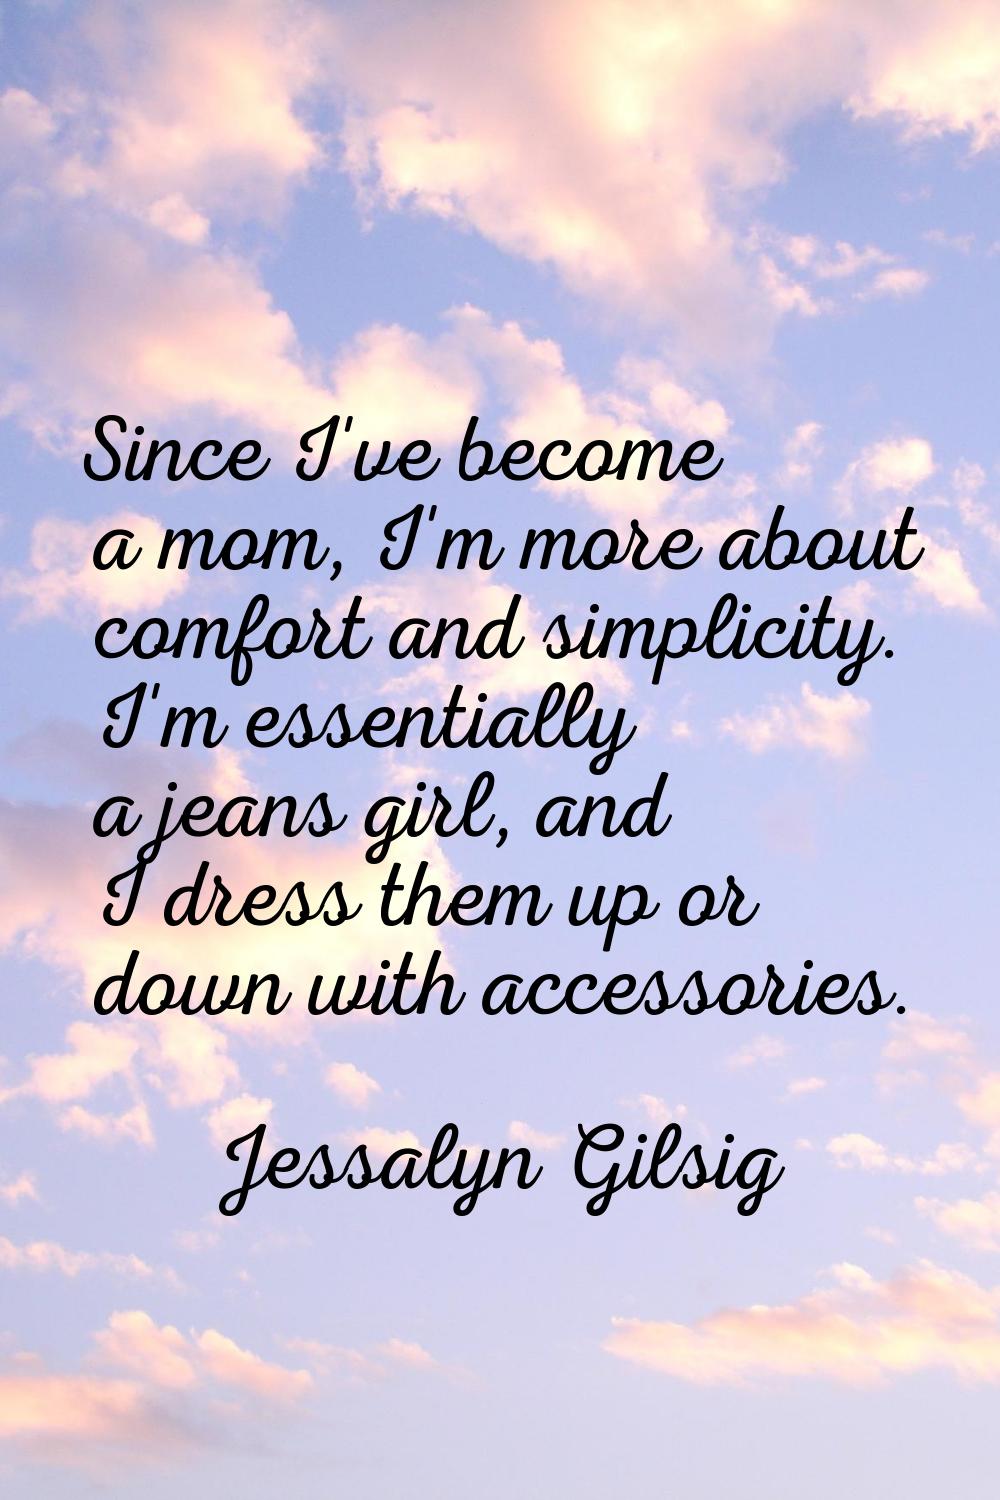 Since I've become a mom, I'm more about comfort and simplicity. I'm essentially a jeans girl, and I